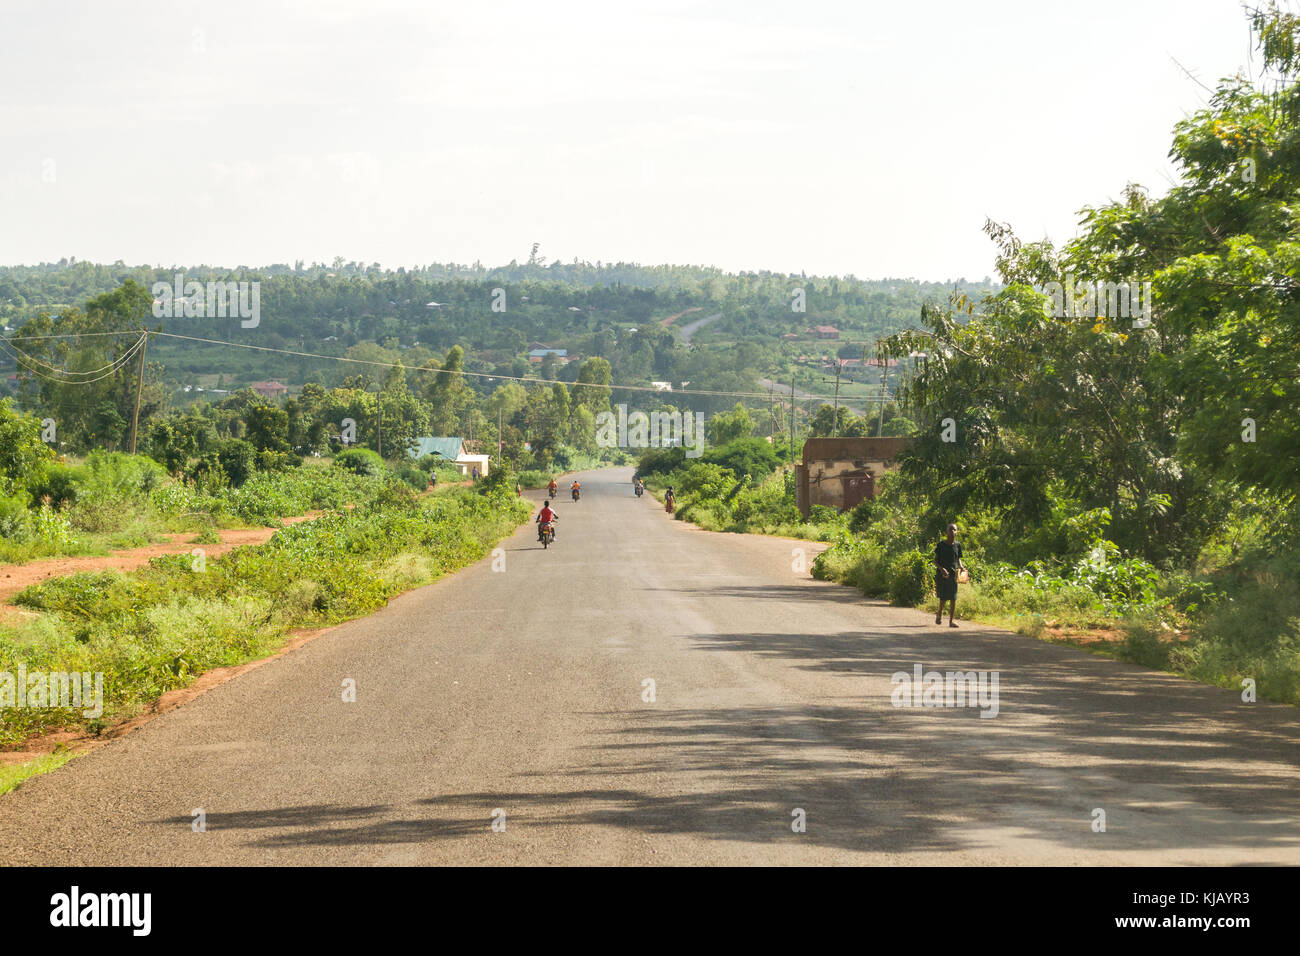 A wide dual carriageway road running through countryside with vehicles and people on it, Kenya, East Africa Stock Photo